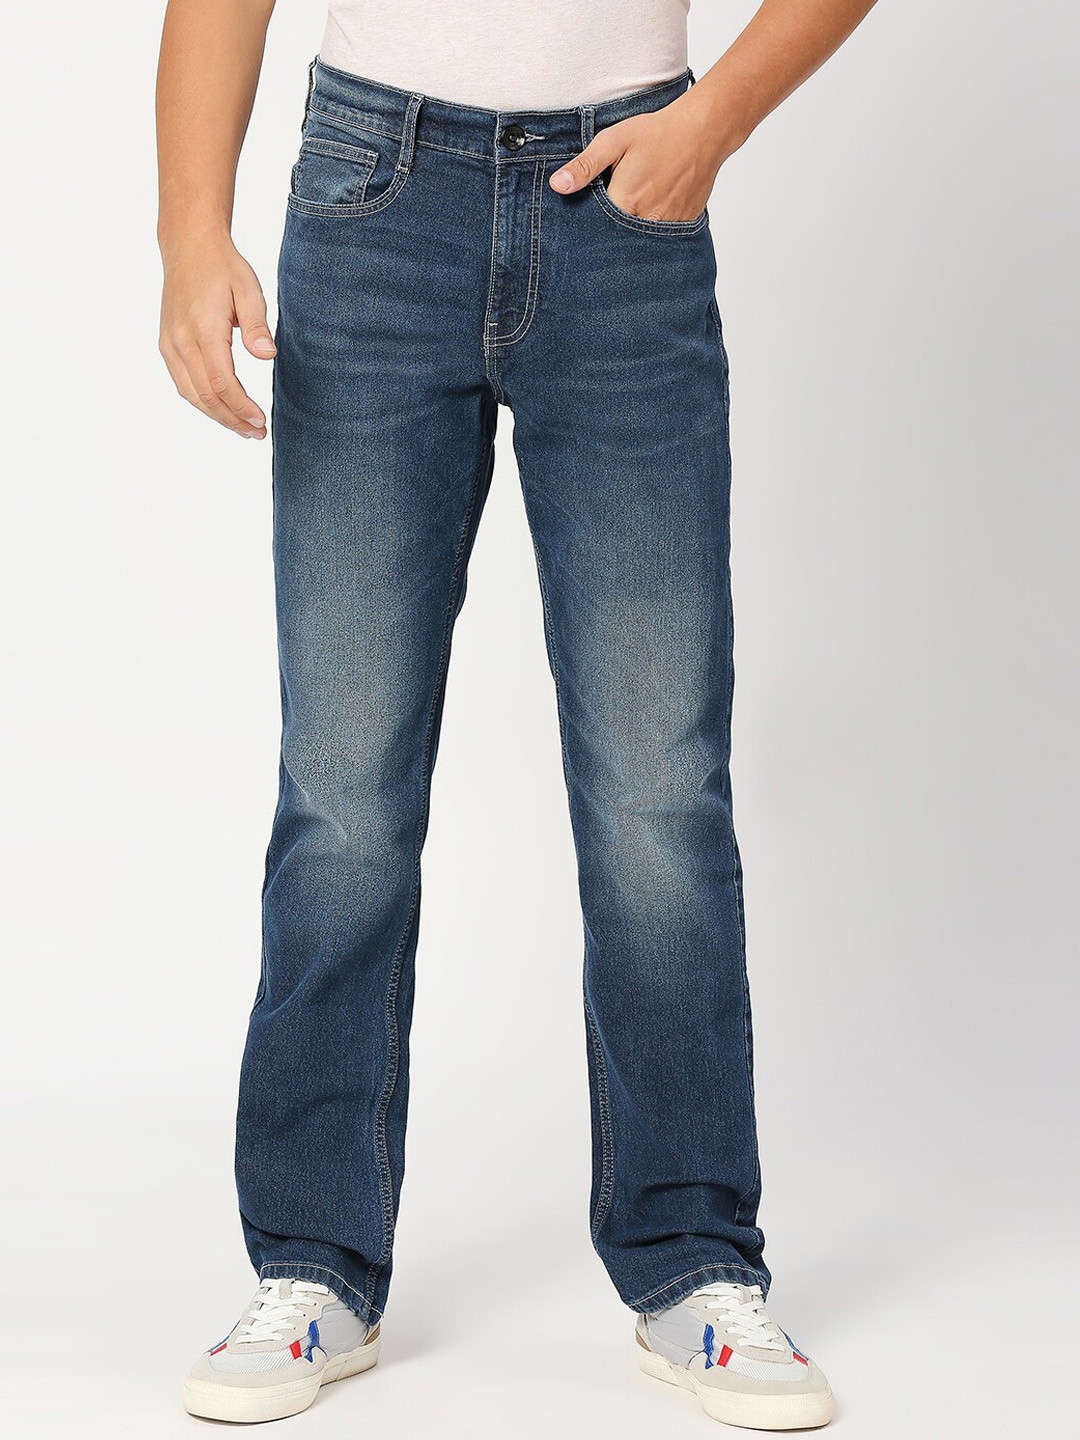 Buy Pepe Jeans Men Relaxed Fit Mid Rise Light Fade Stretchable Jeans ...